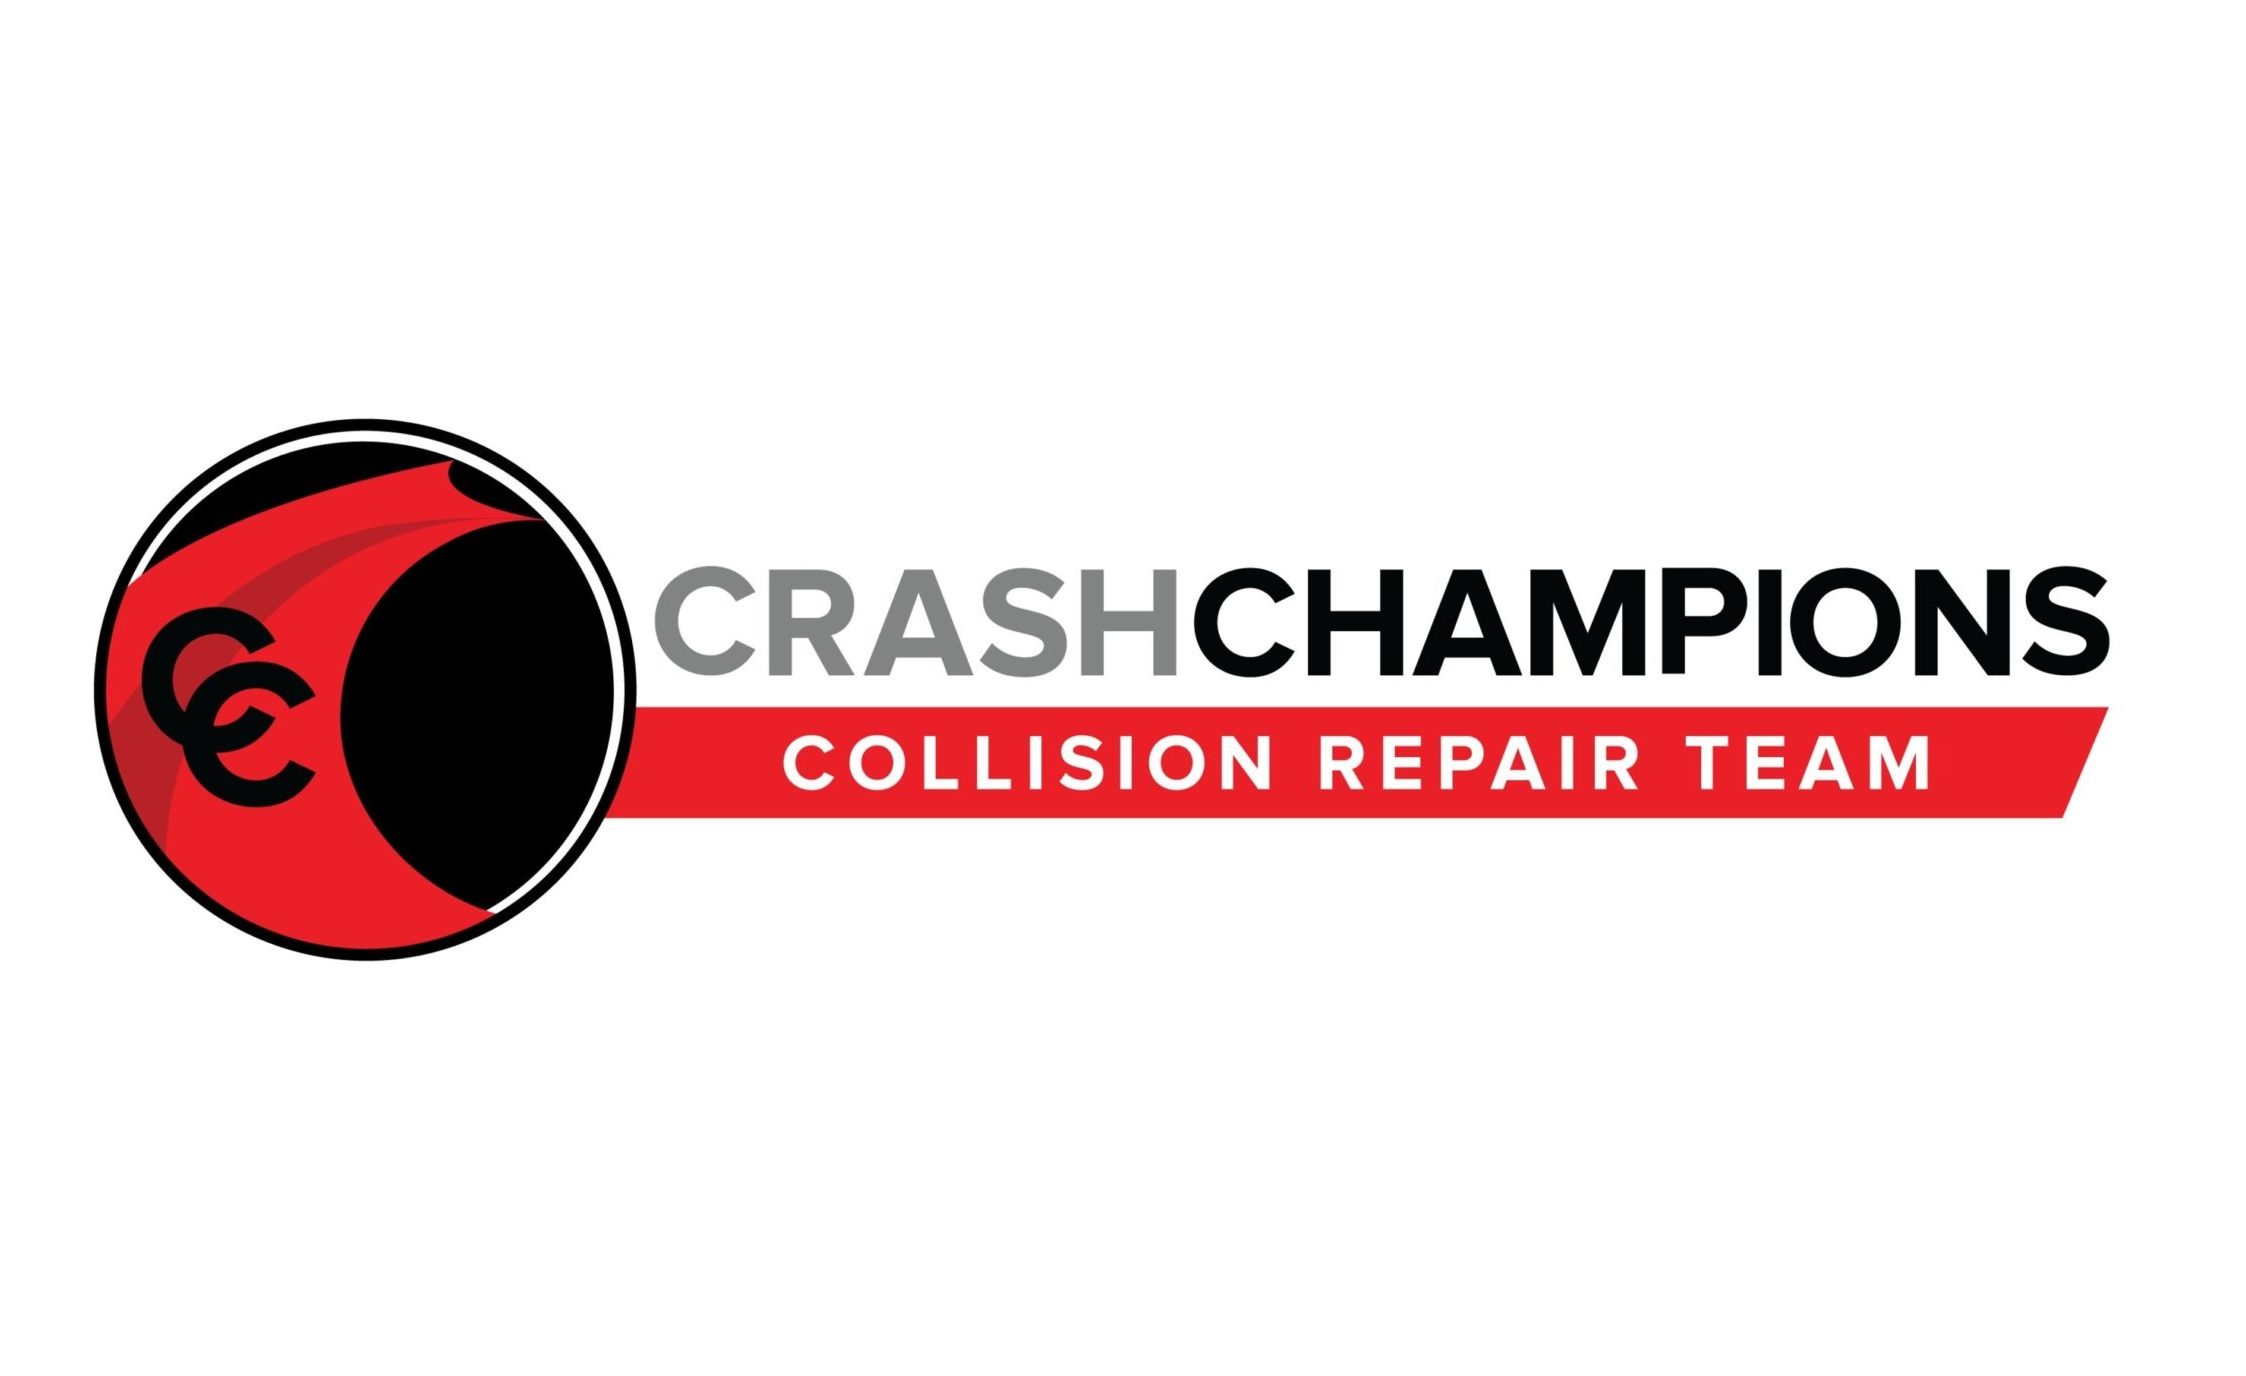 Naming names: Crash Champions, Fountain Valley offer perspective on branding